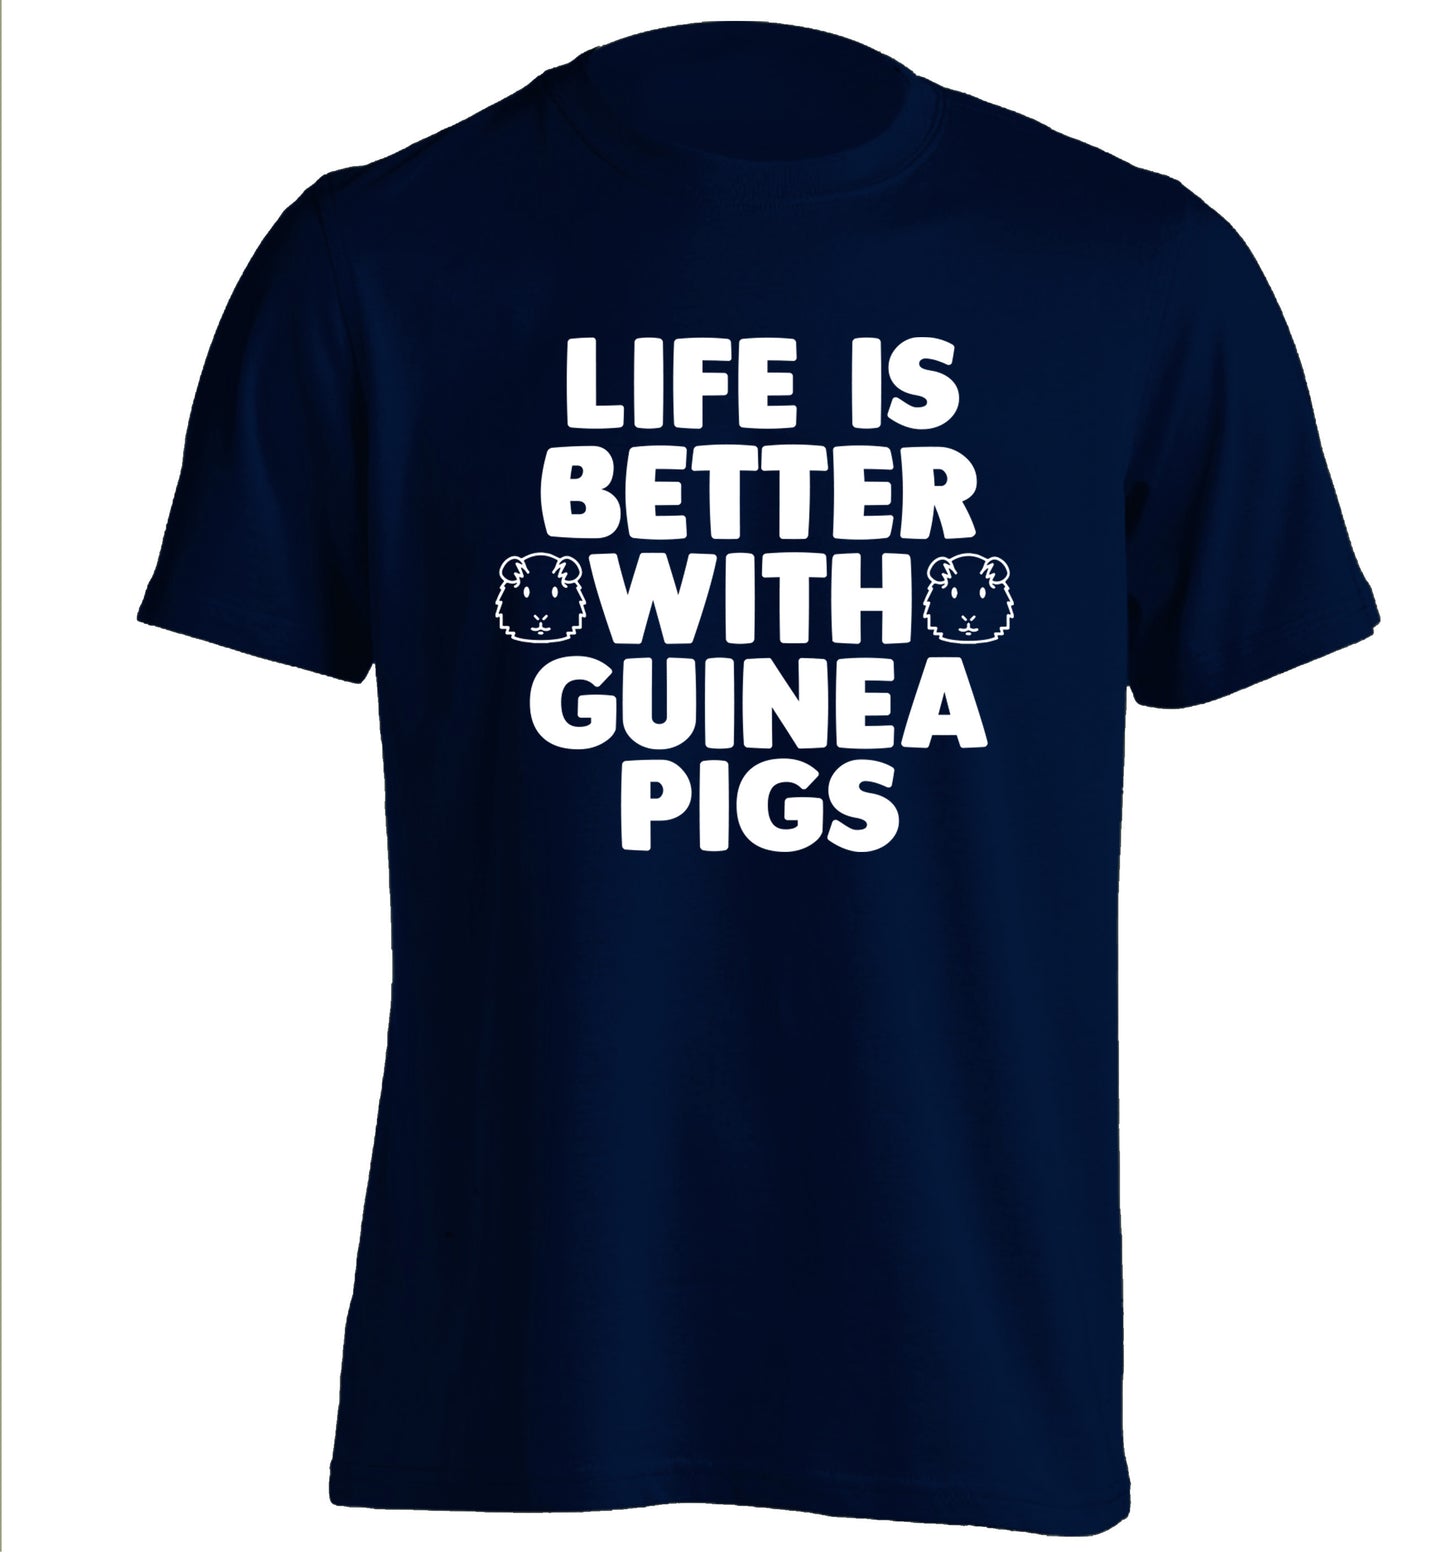 Life is better with guinea pigs adults unisex navy Tshirt 2XL